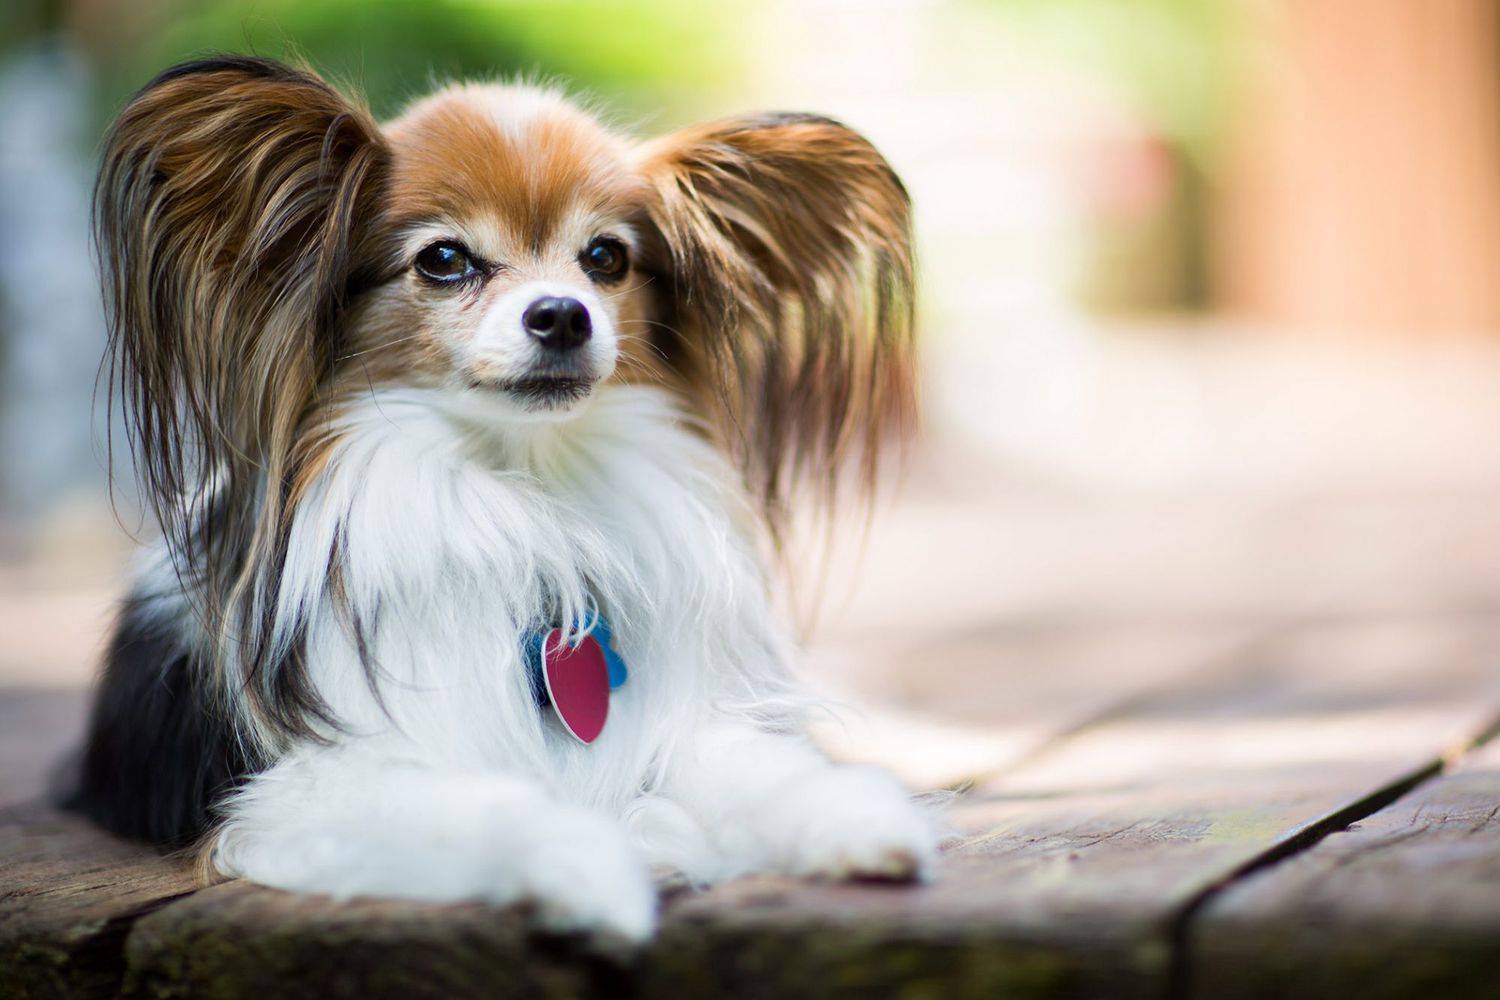 17 of the Longest Living Dog Breeds | Daily Paws